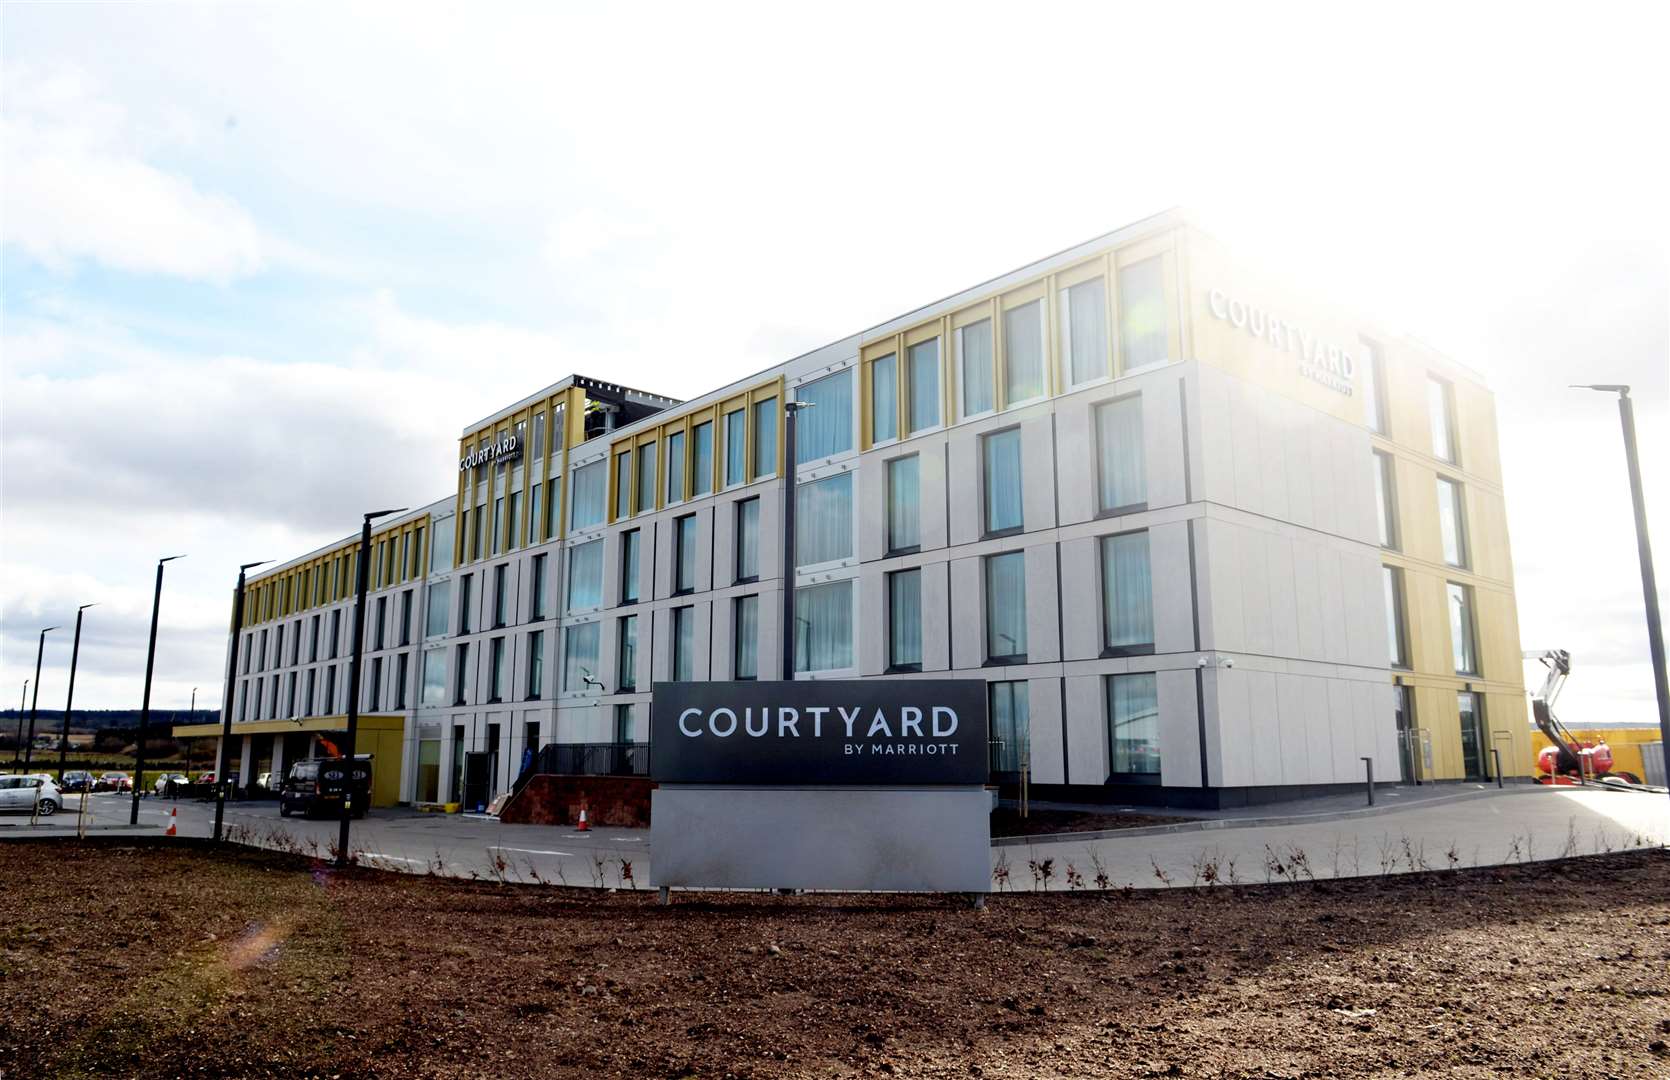 The new Courtyard by Marriott Hotel at Inverness Airport is set to open on Monday.